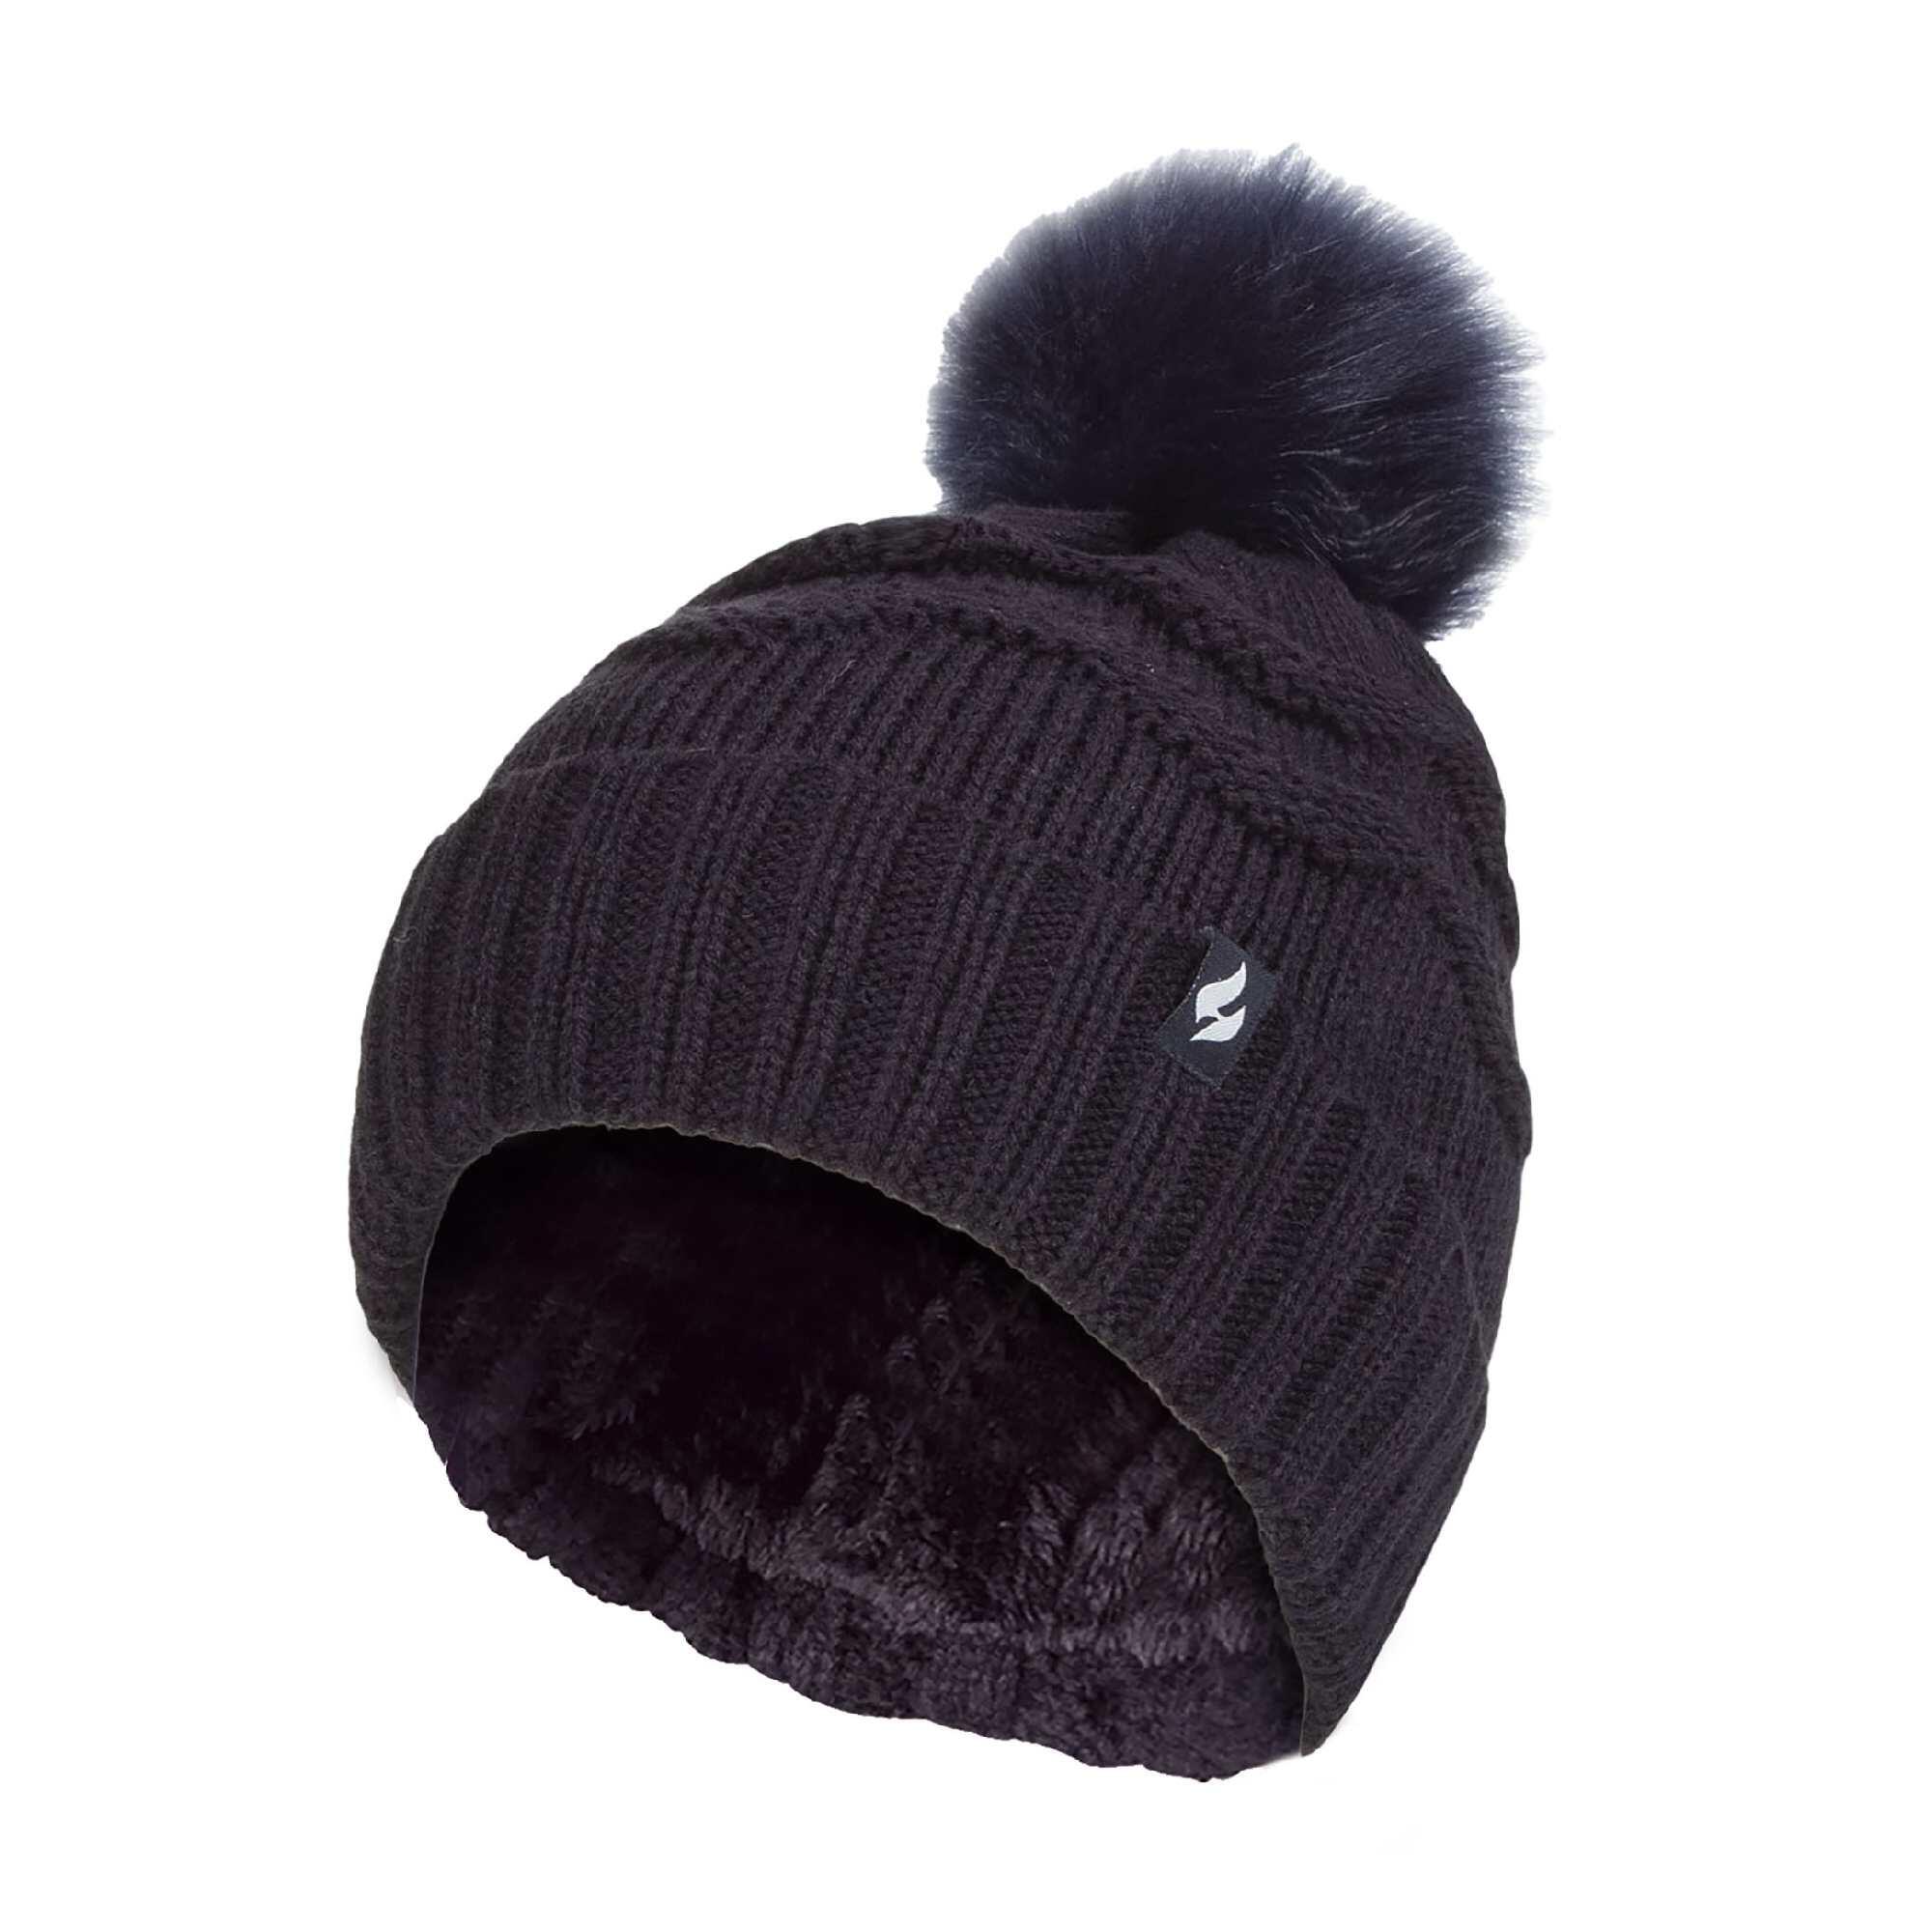 Ladies Winter Zigzag Patterned Fur Cuff Bobble Thermal Hat 1/7